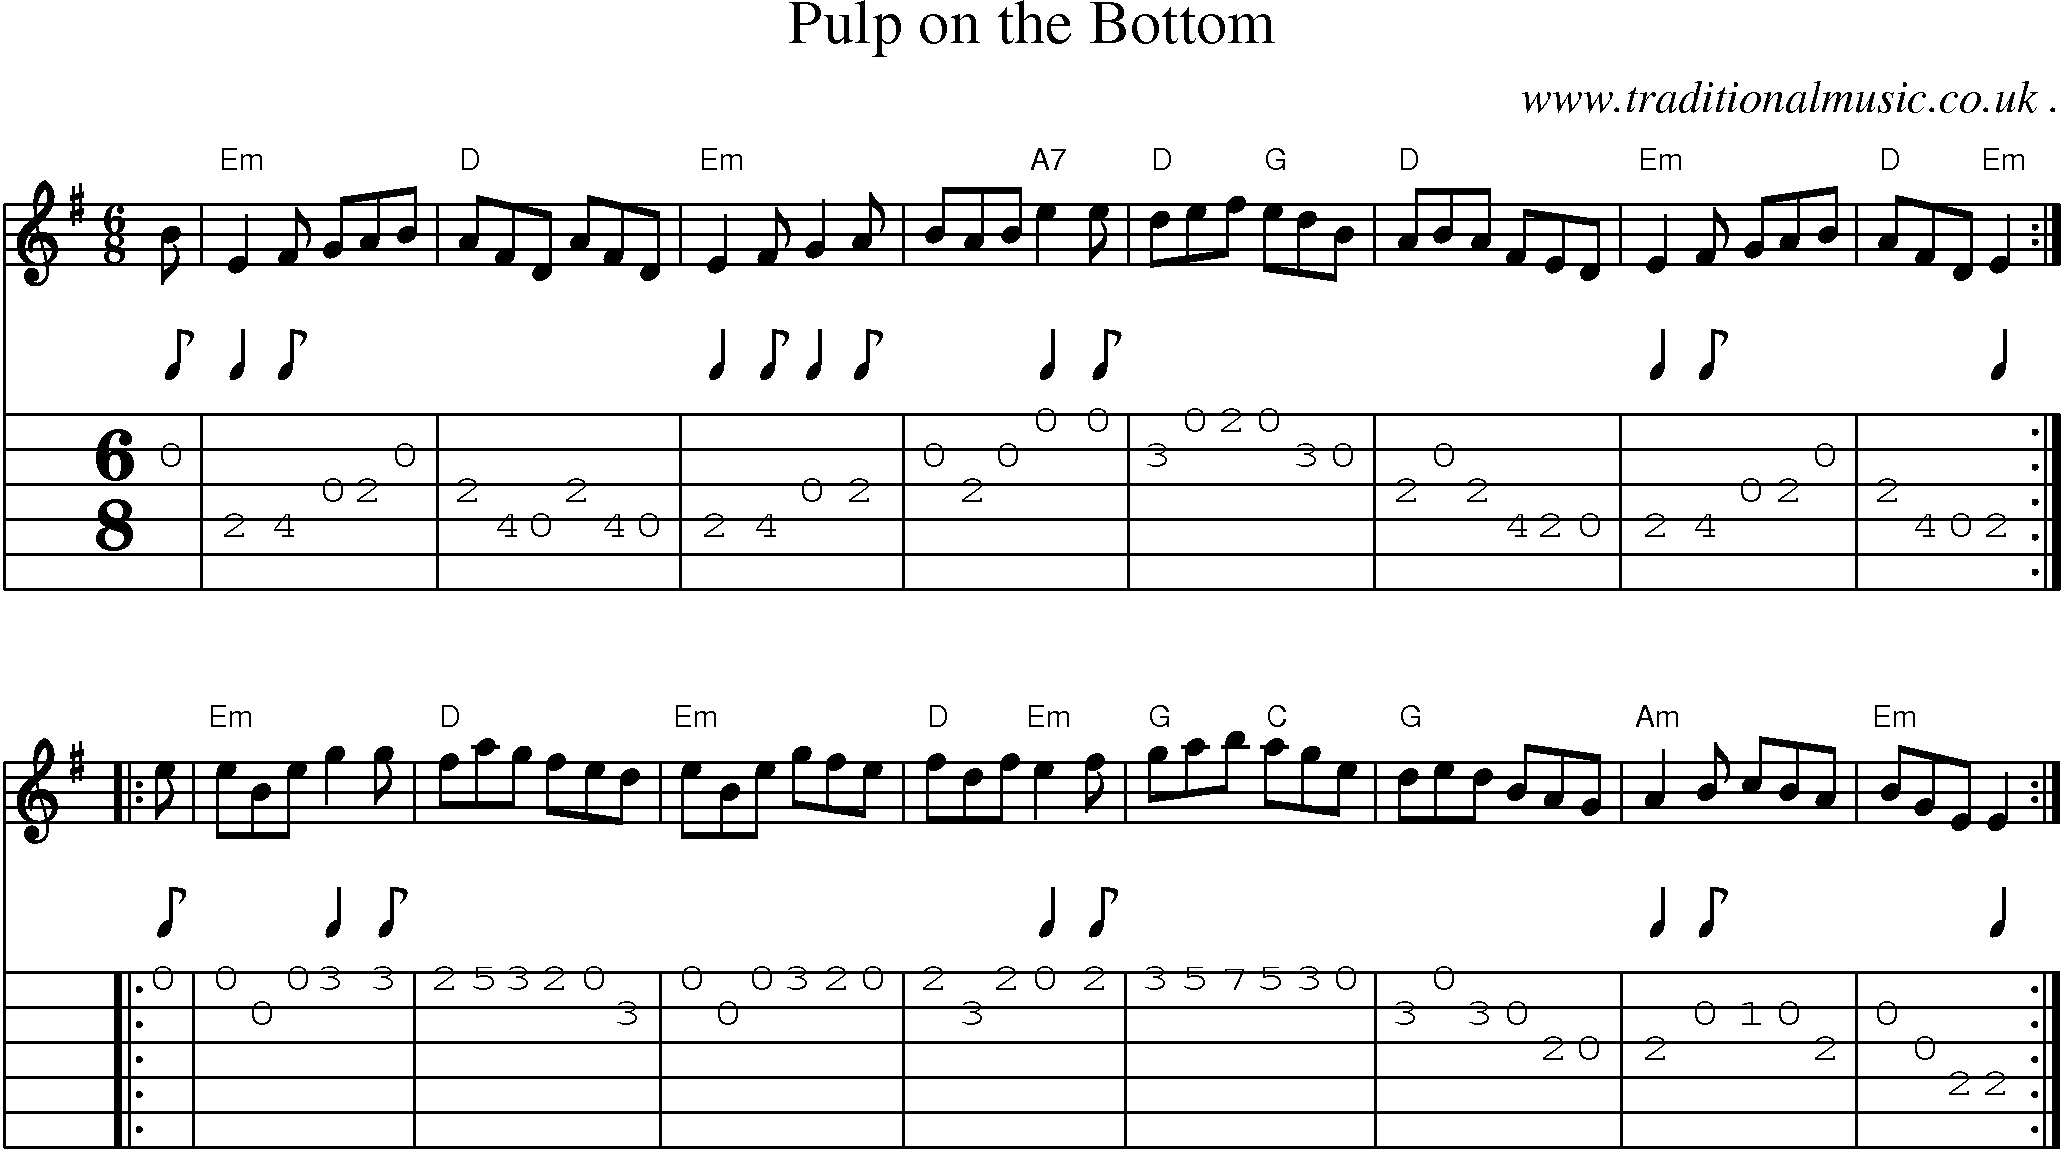 Sheet-music  score, Chords and Guitar Tabs for Pulp On The Bottom